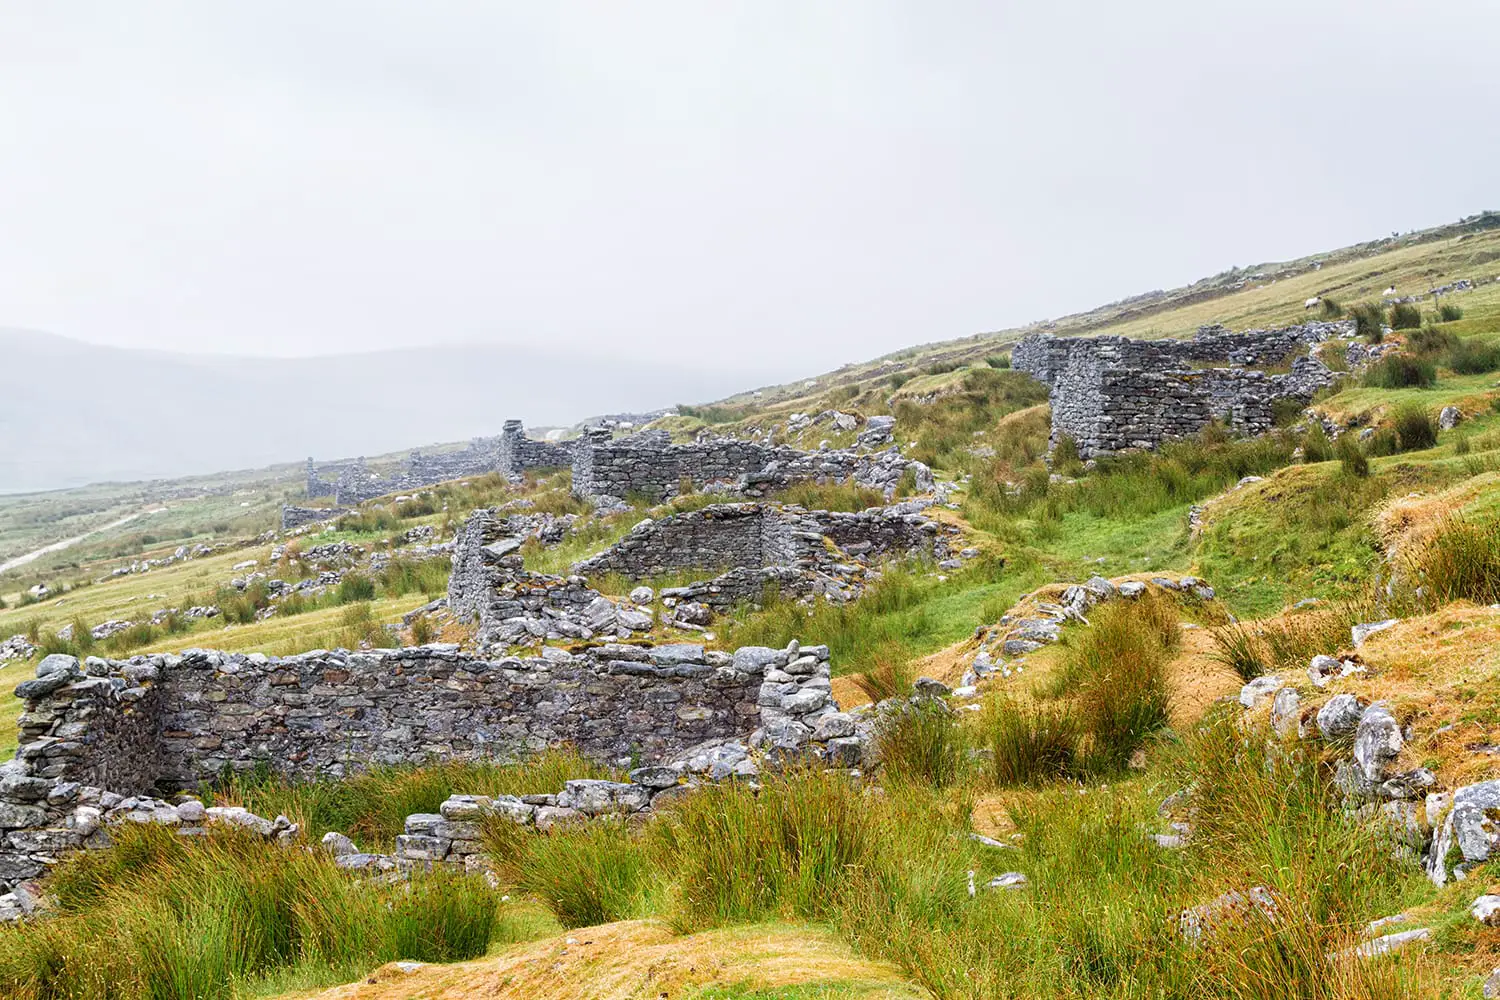 Abandoned dry stone cottages in the deserted village of Slievemore in Achill Island, Ireland